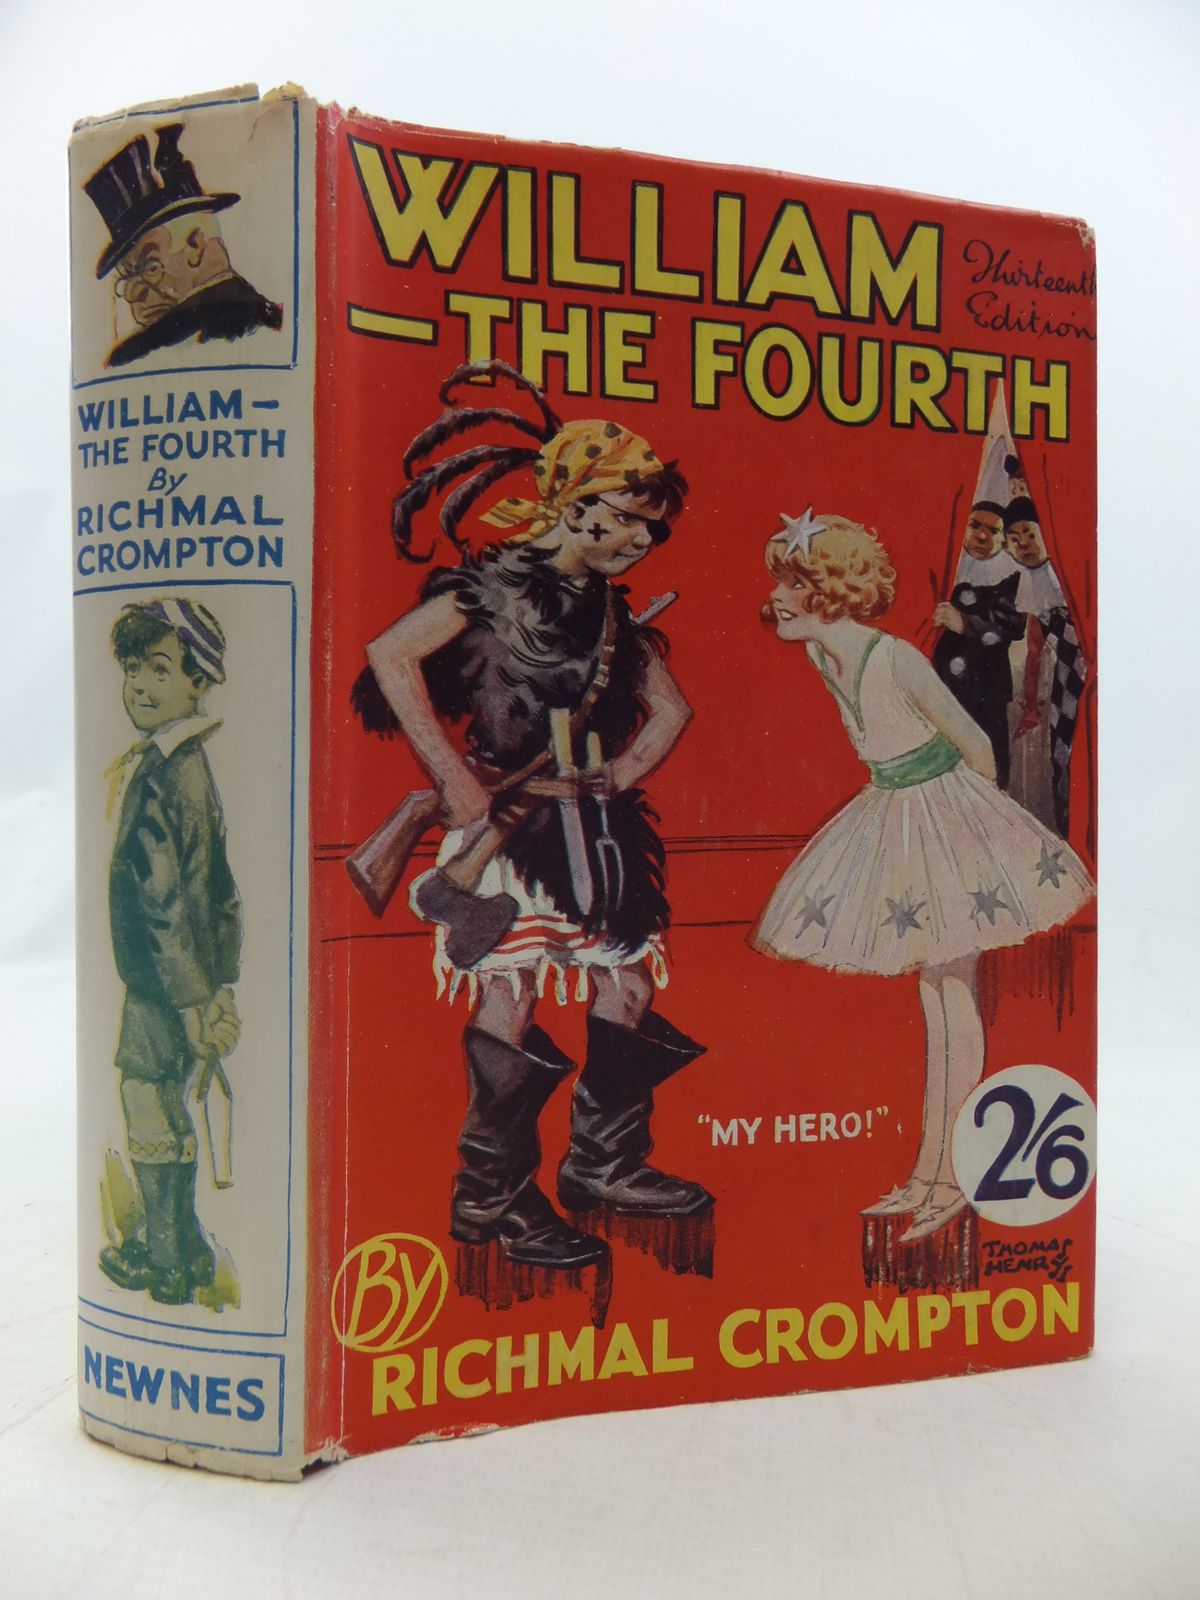 Cover of WILLIAM THE FOURTH by Richmal Crompton